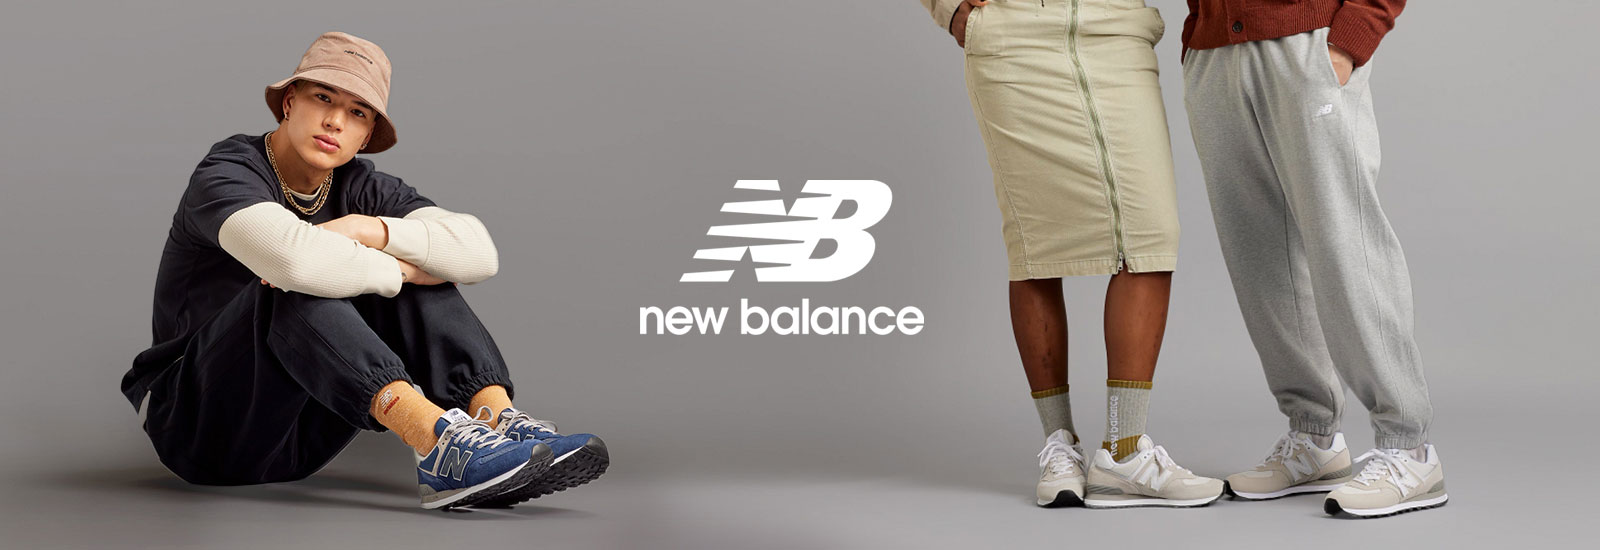 New Balance Shoes, Sneakers - Retro & Trendy | Tillys